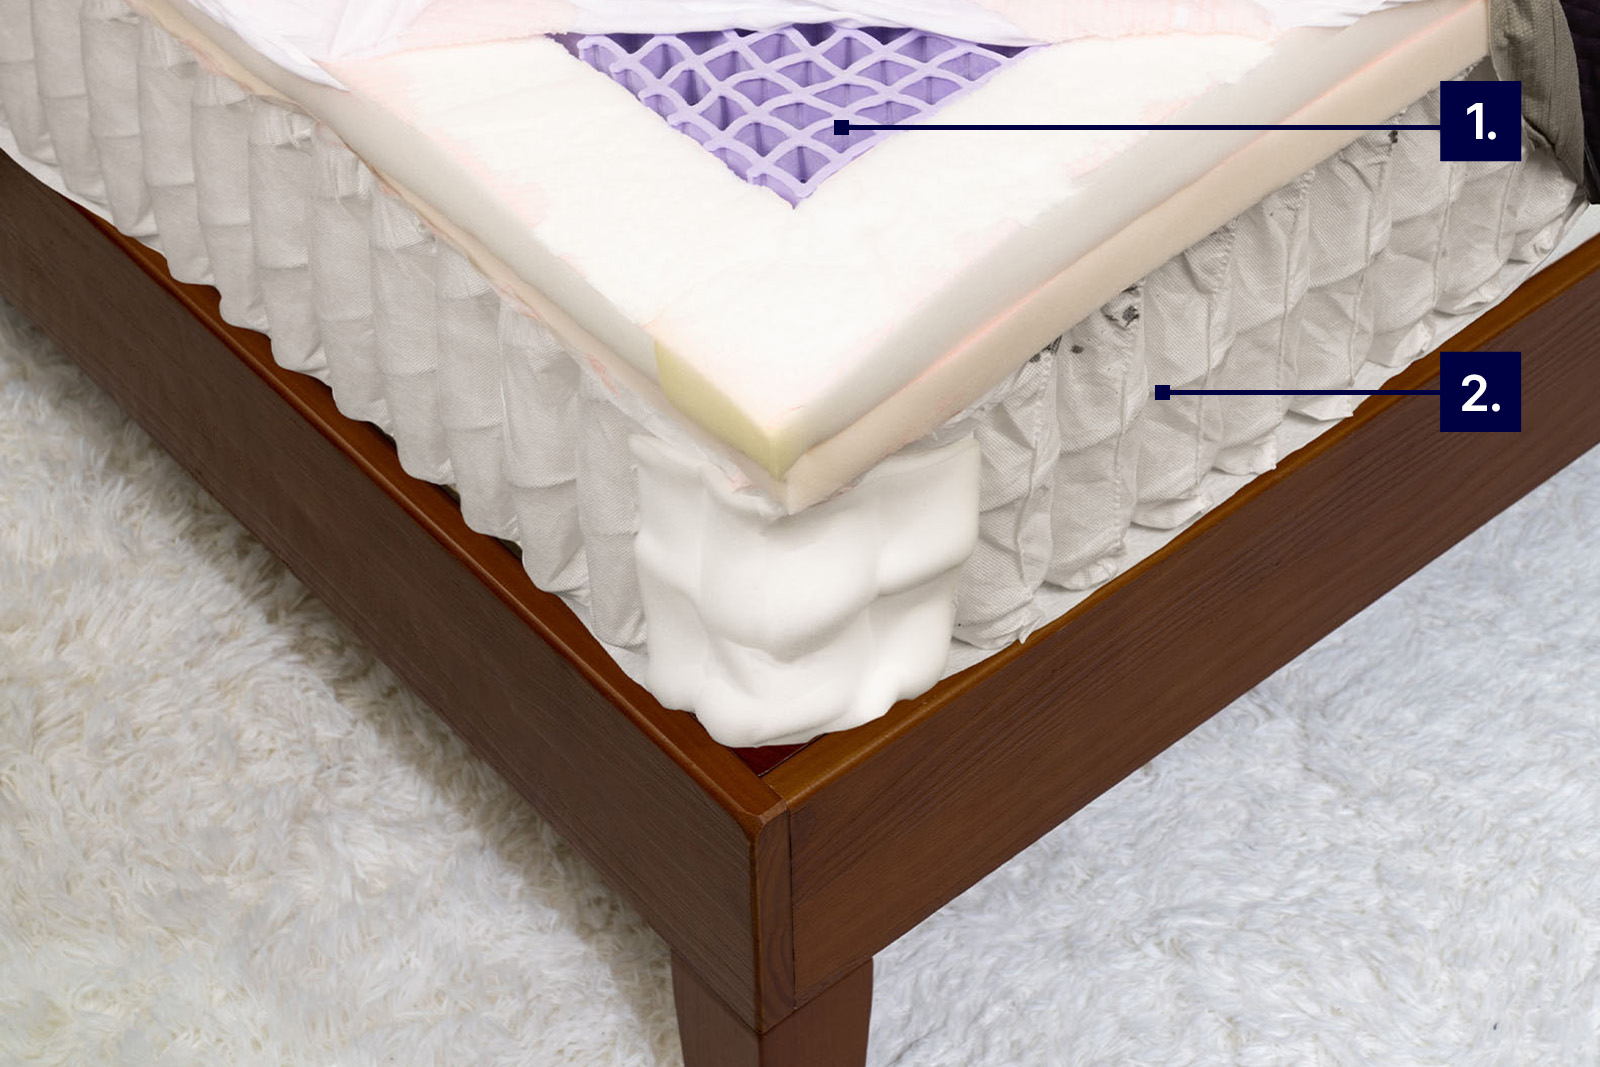 mattress photo from top angle showing Purple Restore Hybrid with labels to demonstrate cooling features